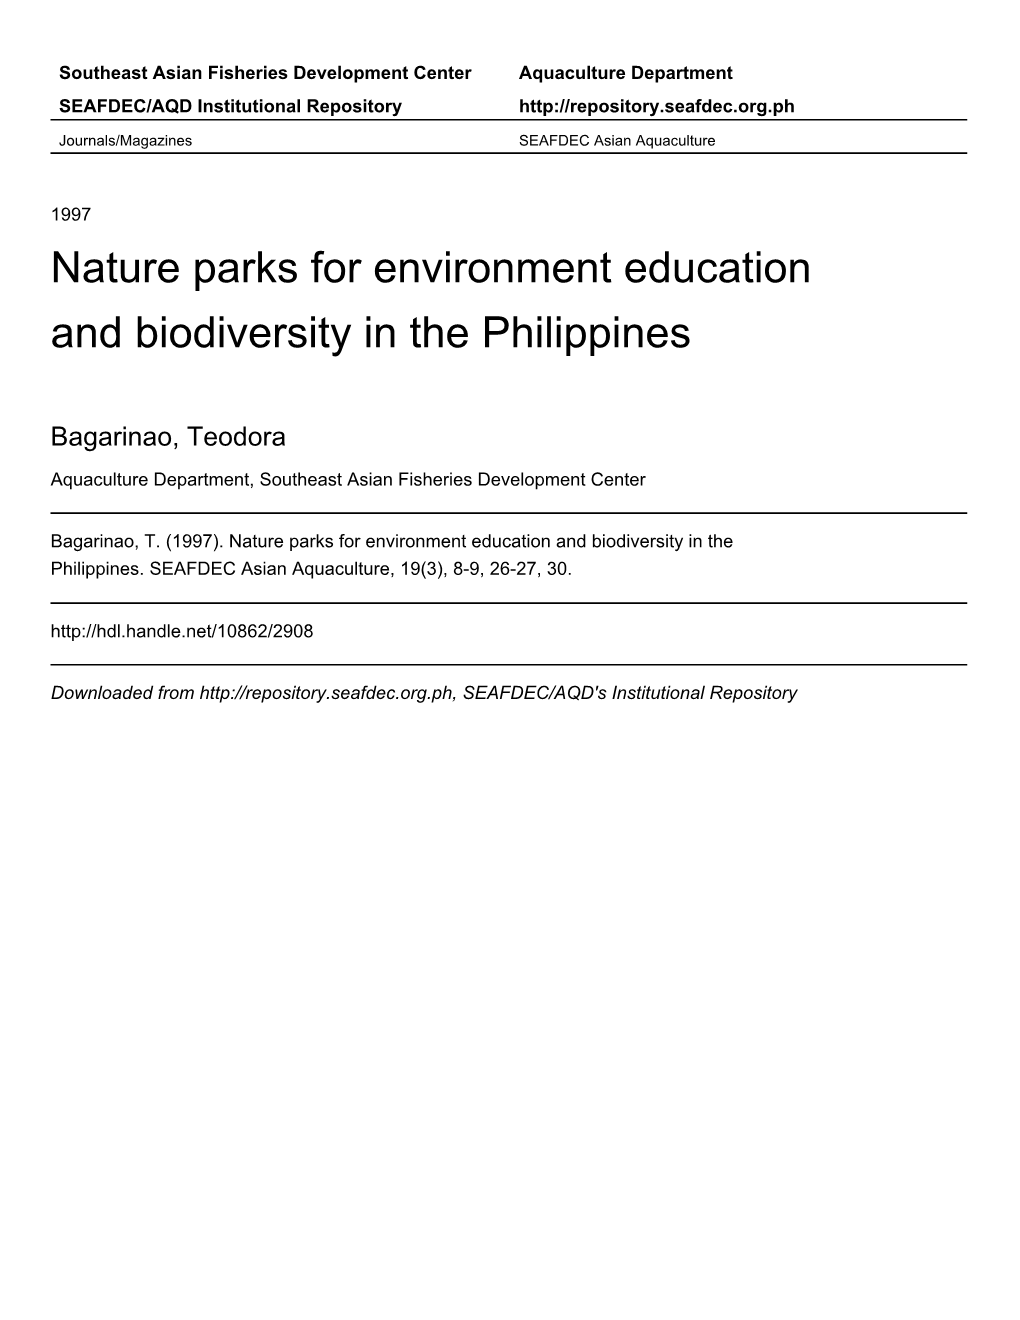 Nature Parks for Environment Education and Biodiversity in the Philippines